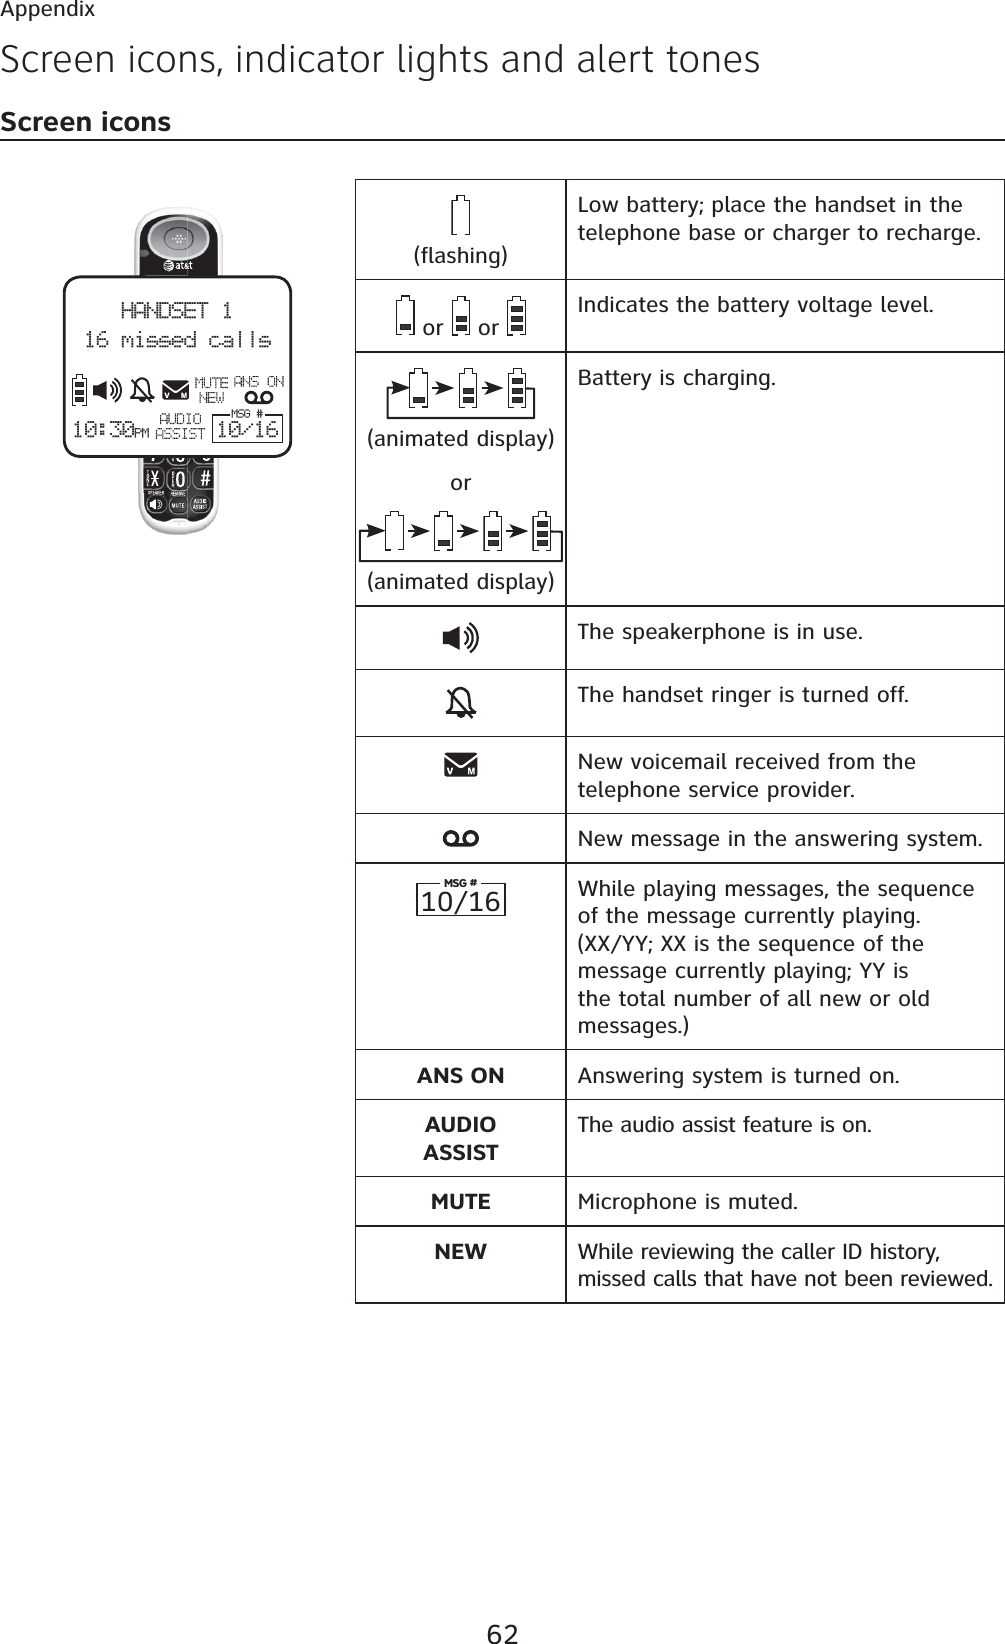 at&t dect 6.0 manual with answering machine